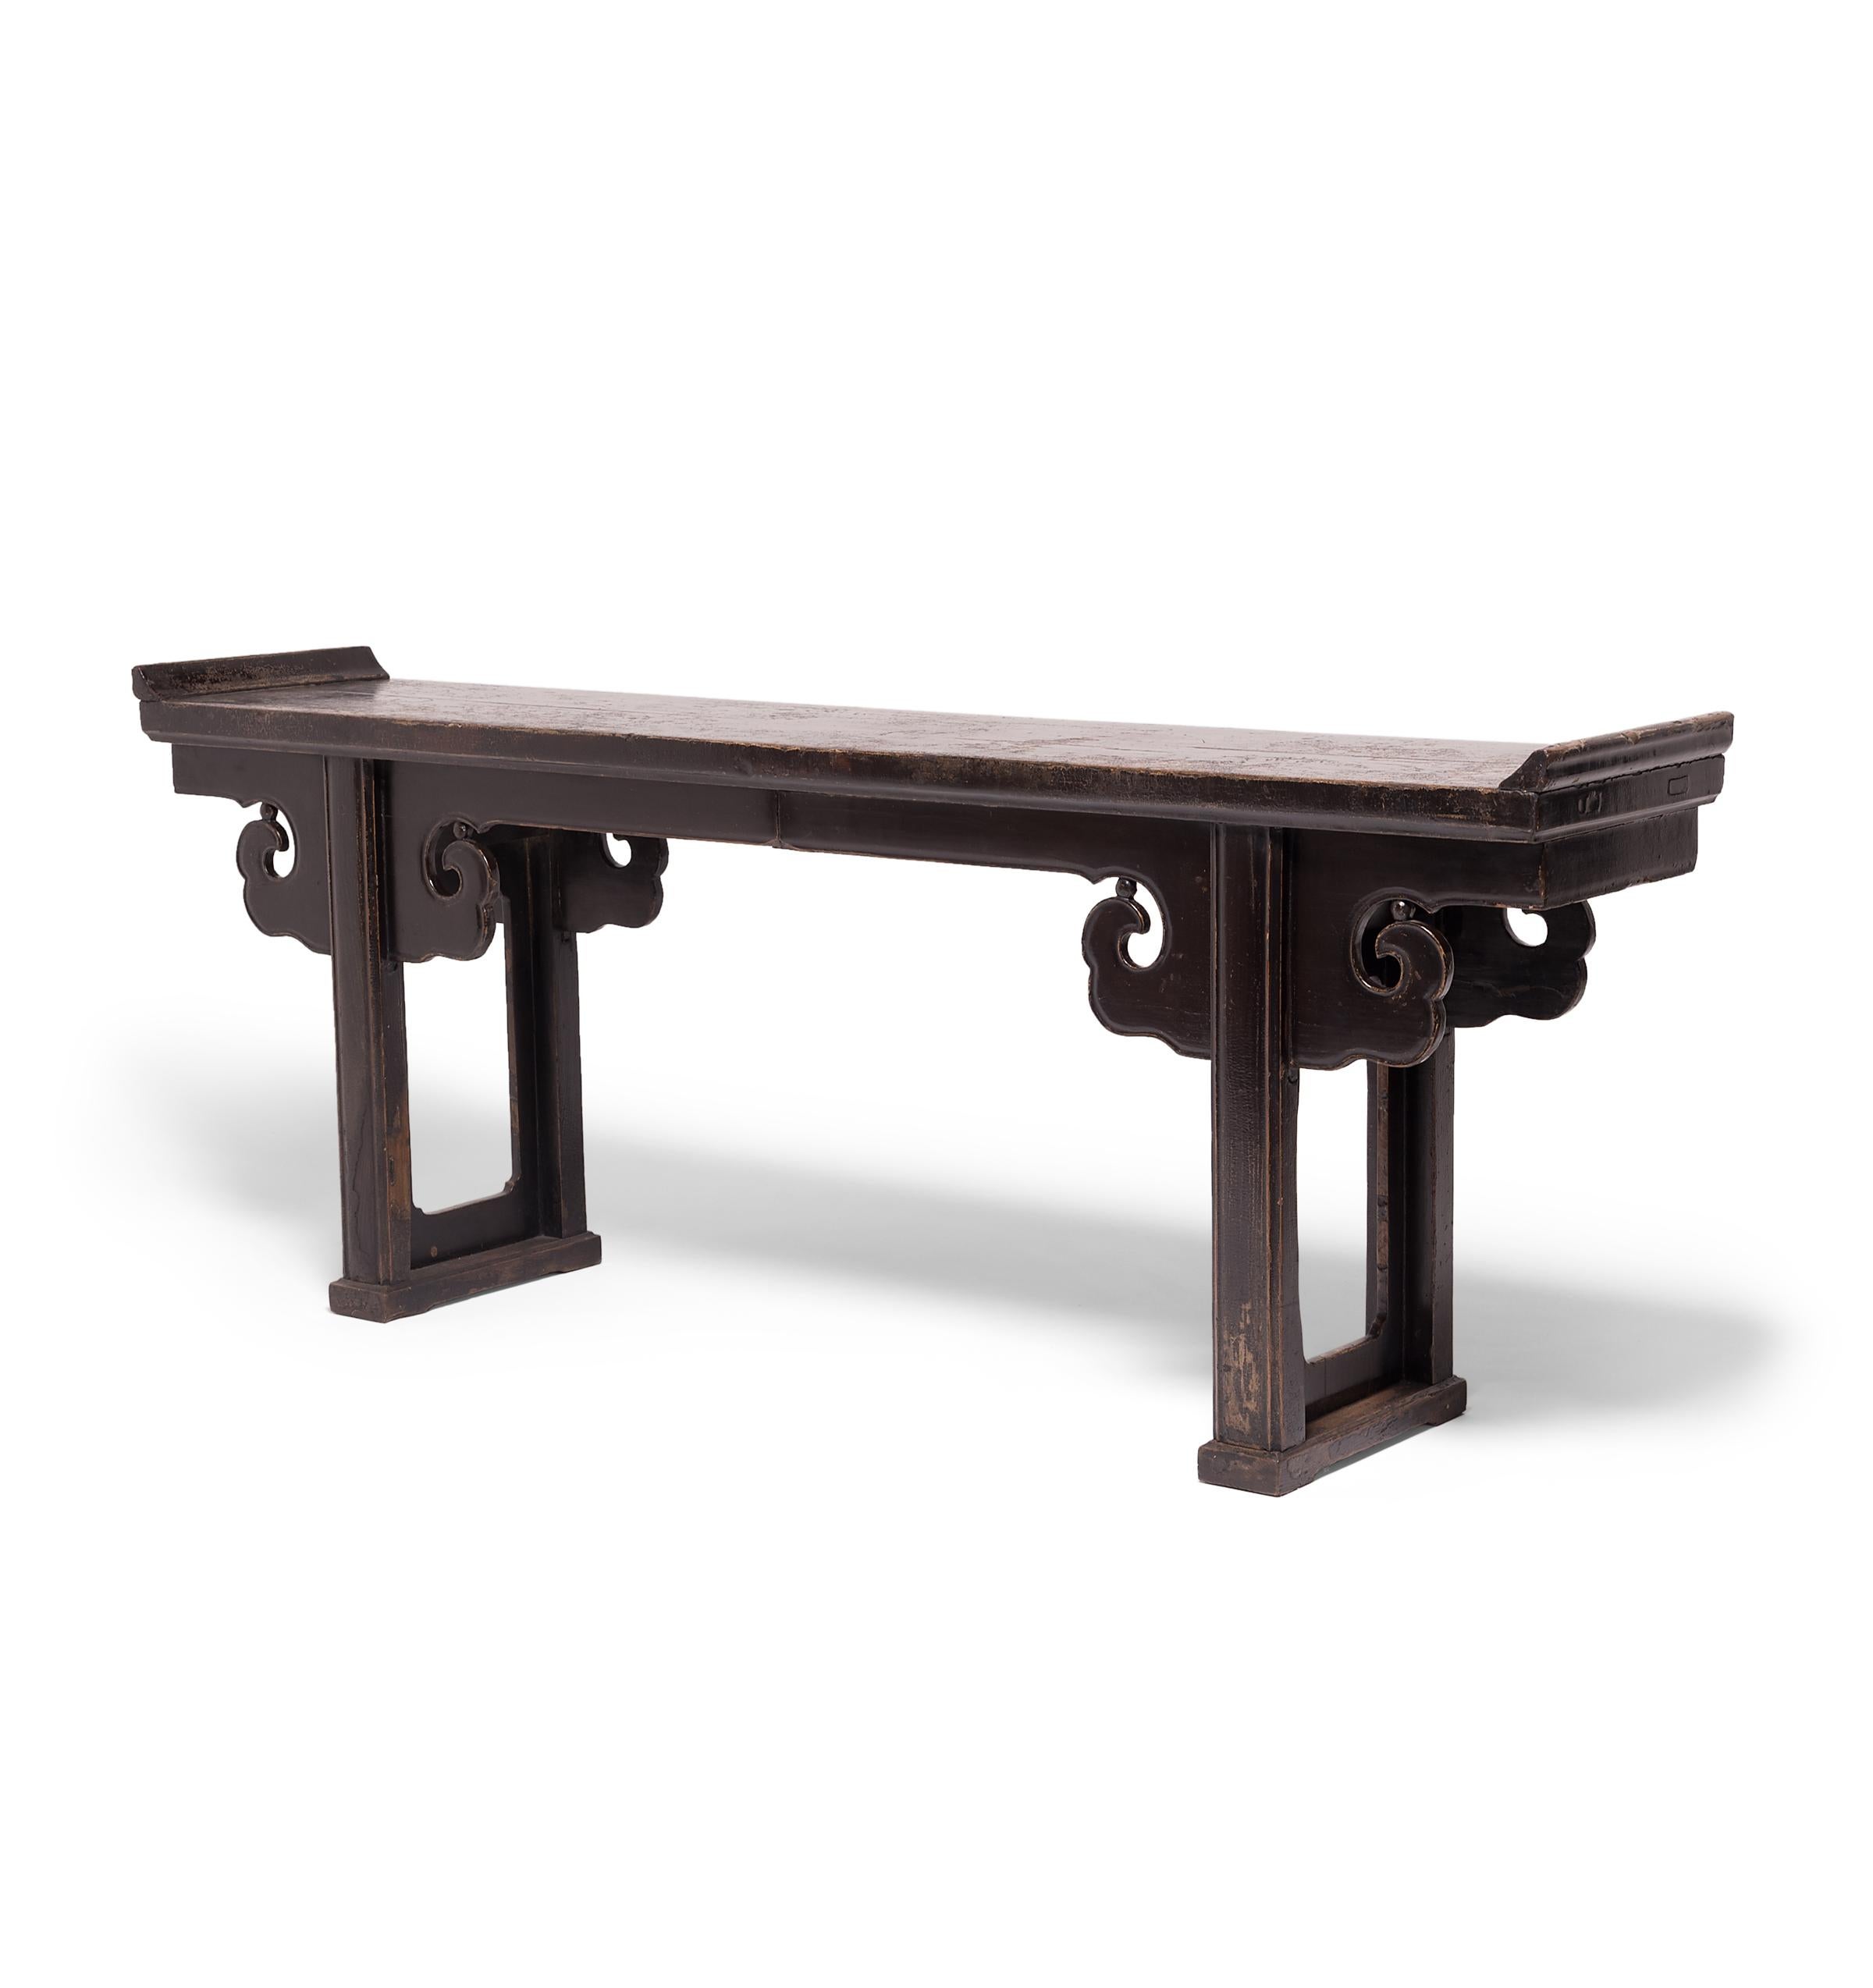 Created in China's Shanxi province in the early 19th century, this impressive altar table with everted ends features straight legs joined with a base stretcher, topped by hand-carved spandrels resembling billowing clouds. Constructed with